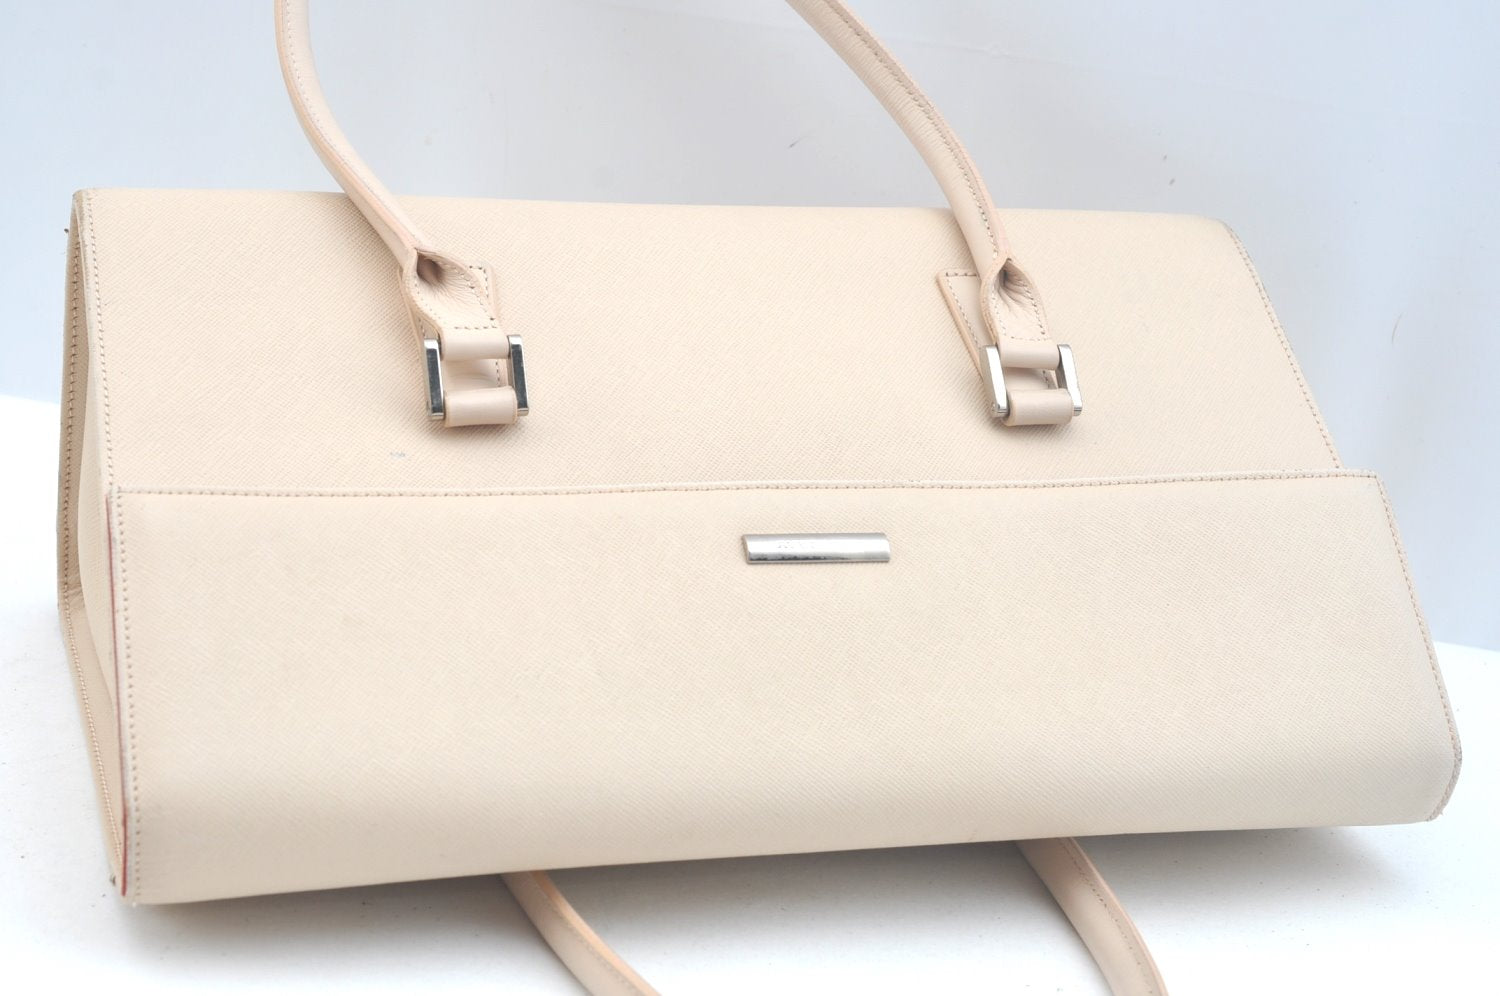 Authentic BURBERRY Vintage Leather Hand Bag White K9792